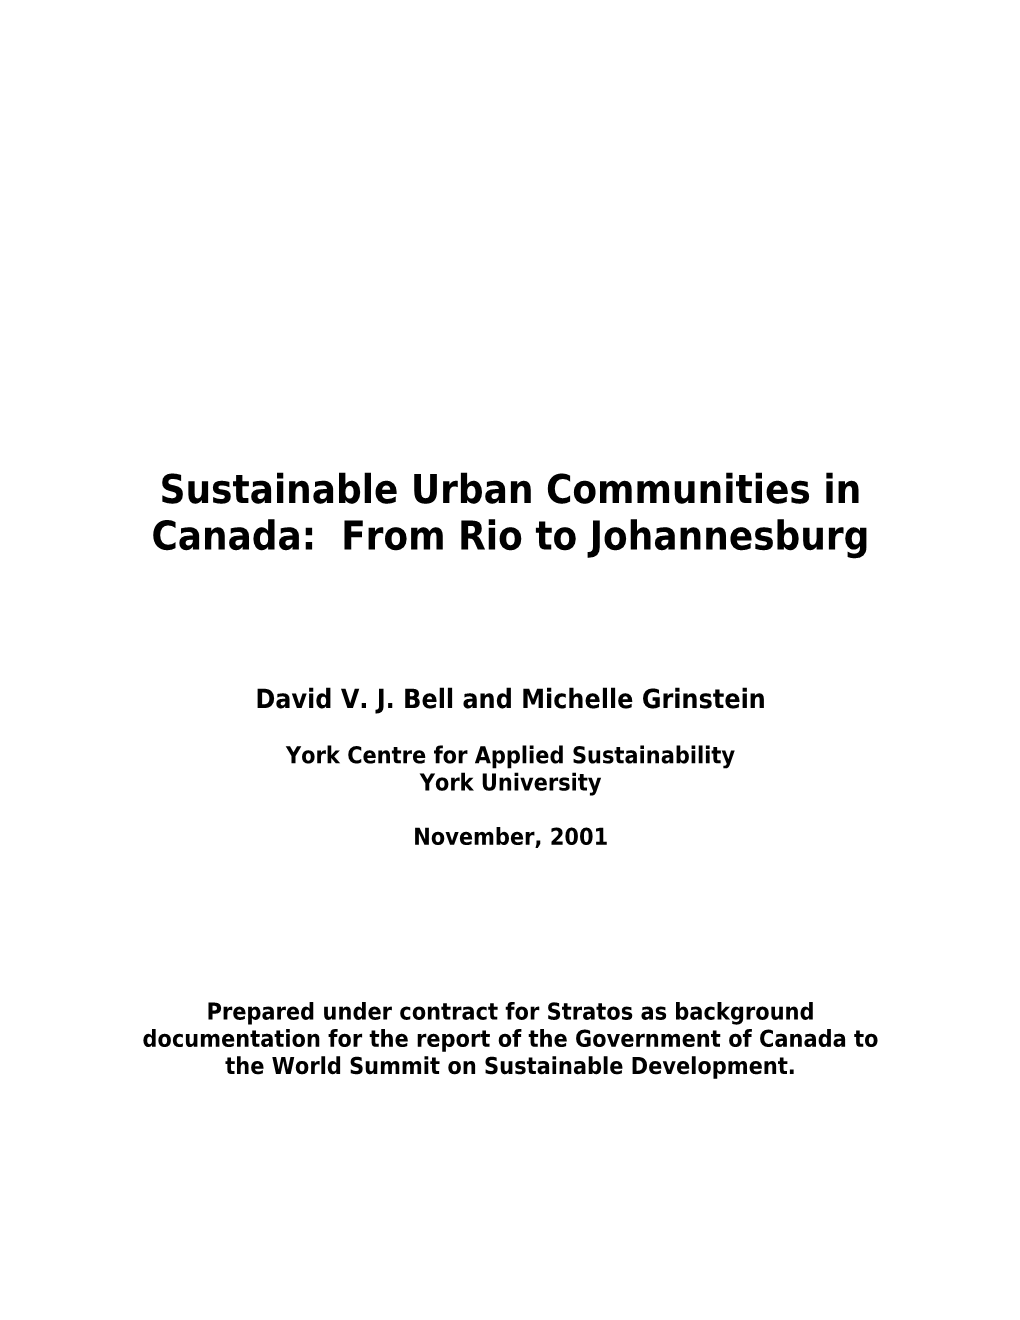 Sustainable Urban Communities in Canada: from Rio to Johannesburg